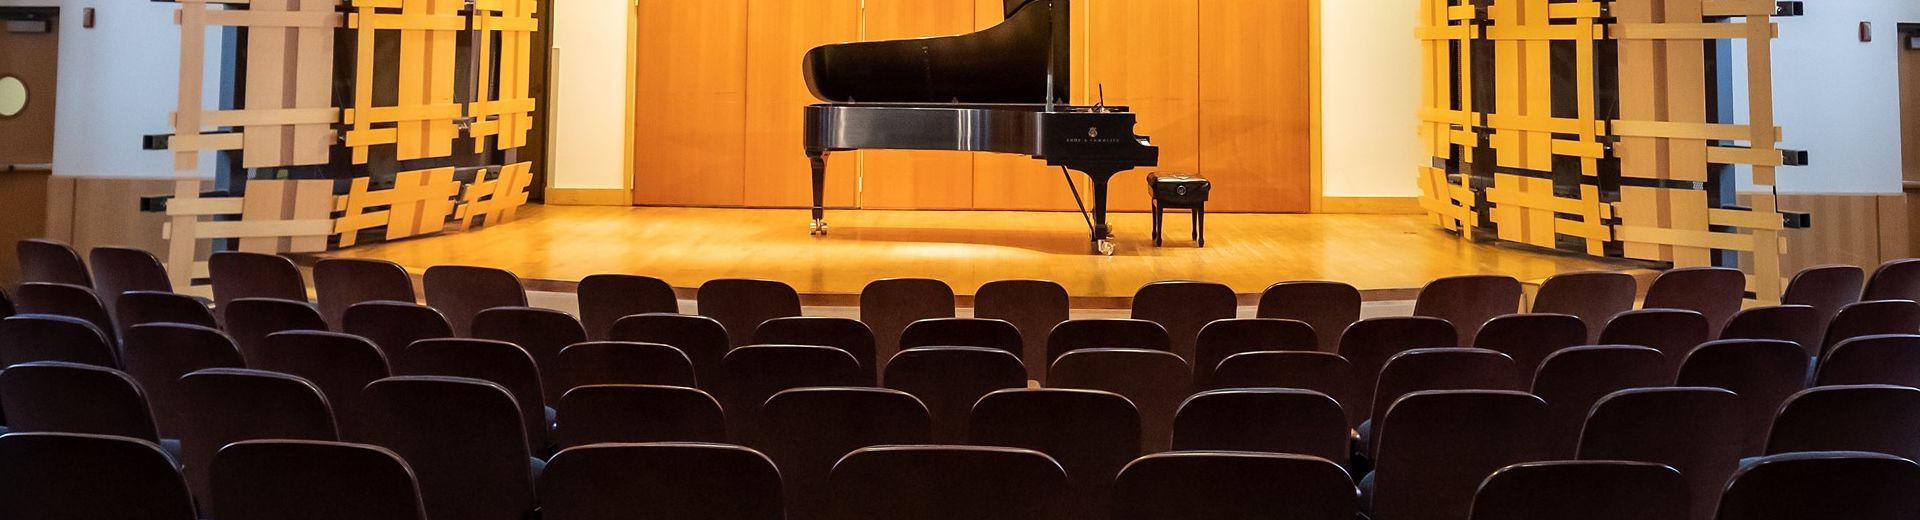 An unattended piano on a stage in an empty auditorium. 